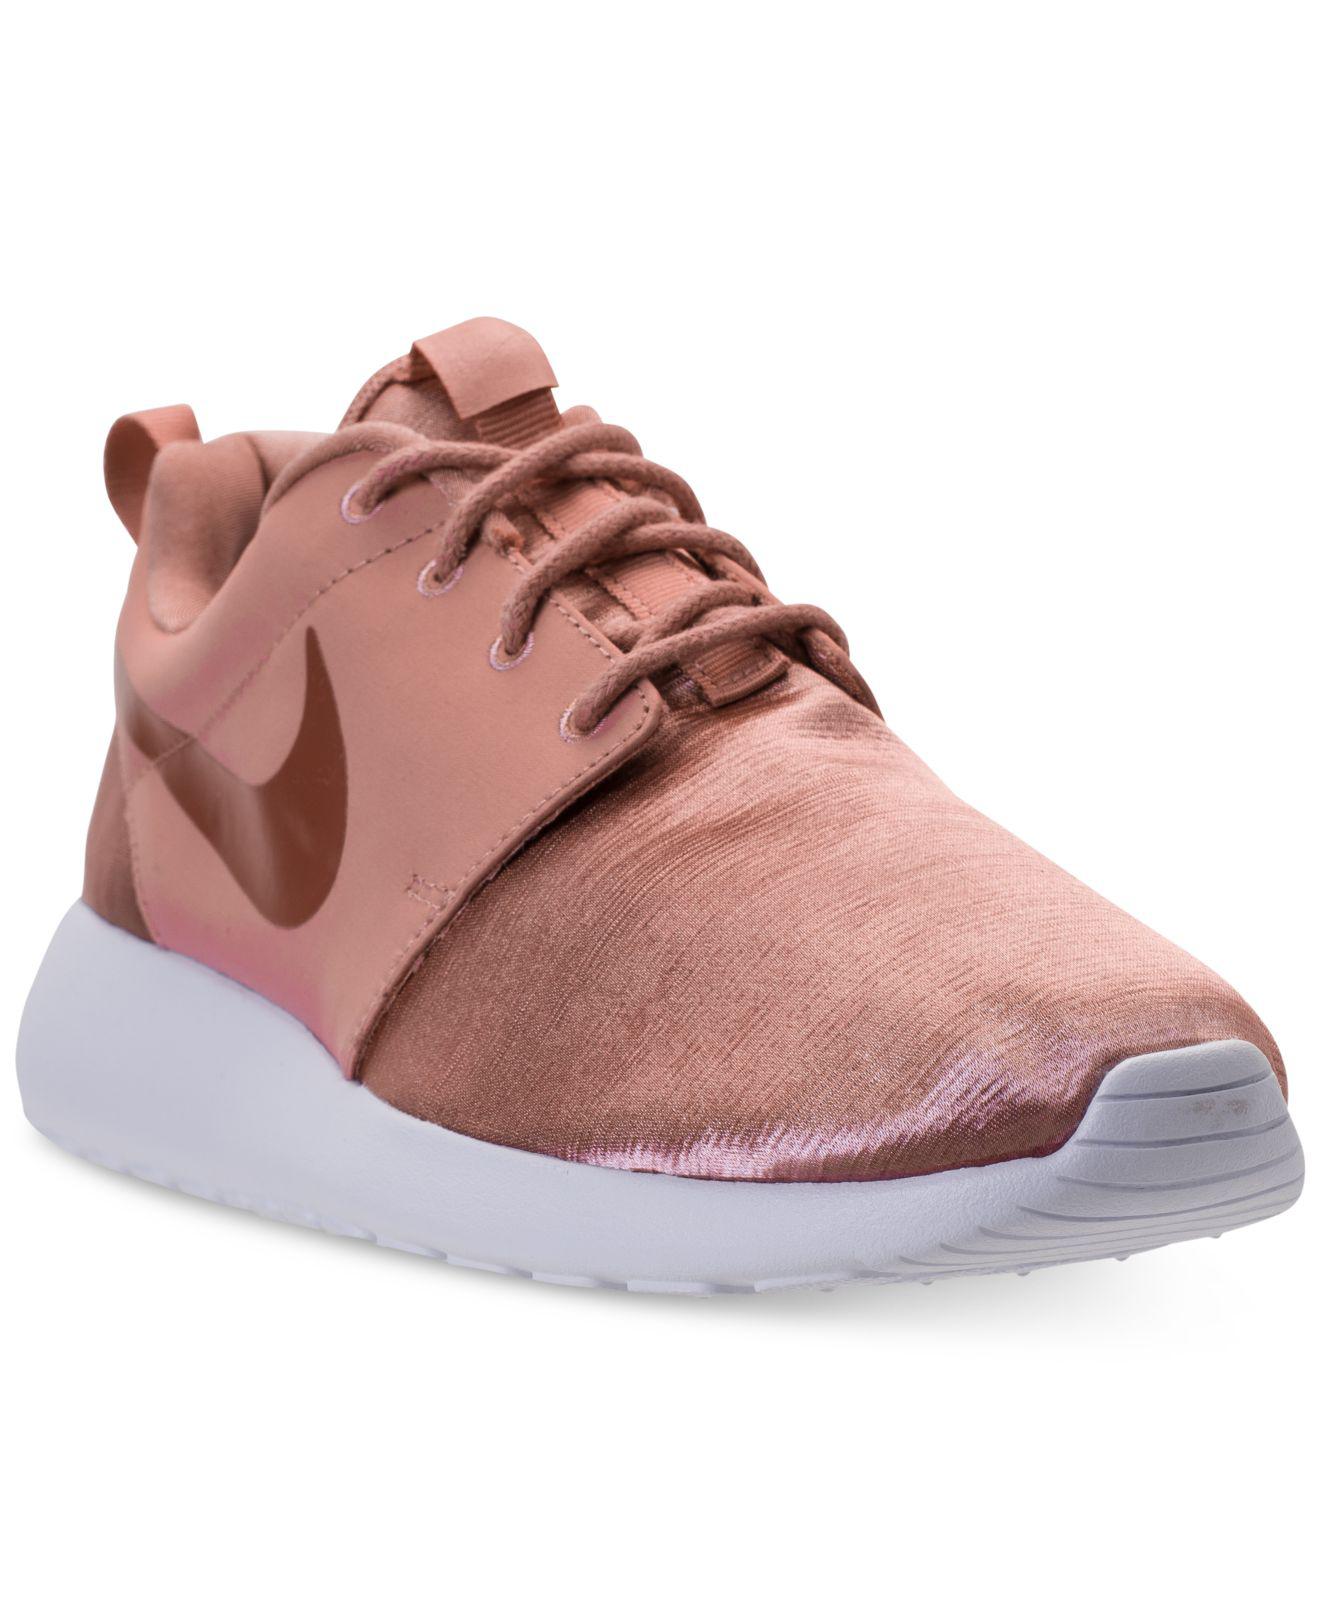 Nike Synthetic Roshe One Premium Casual 